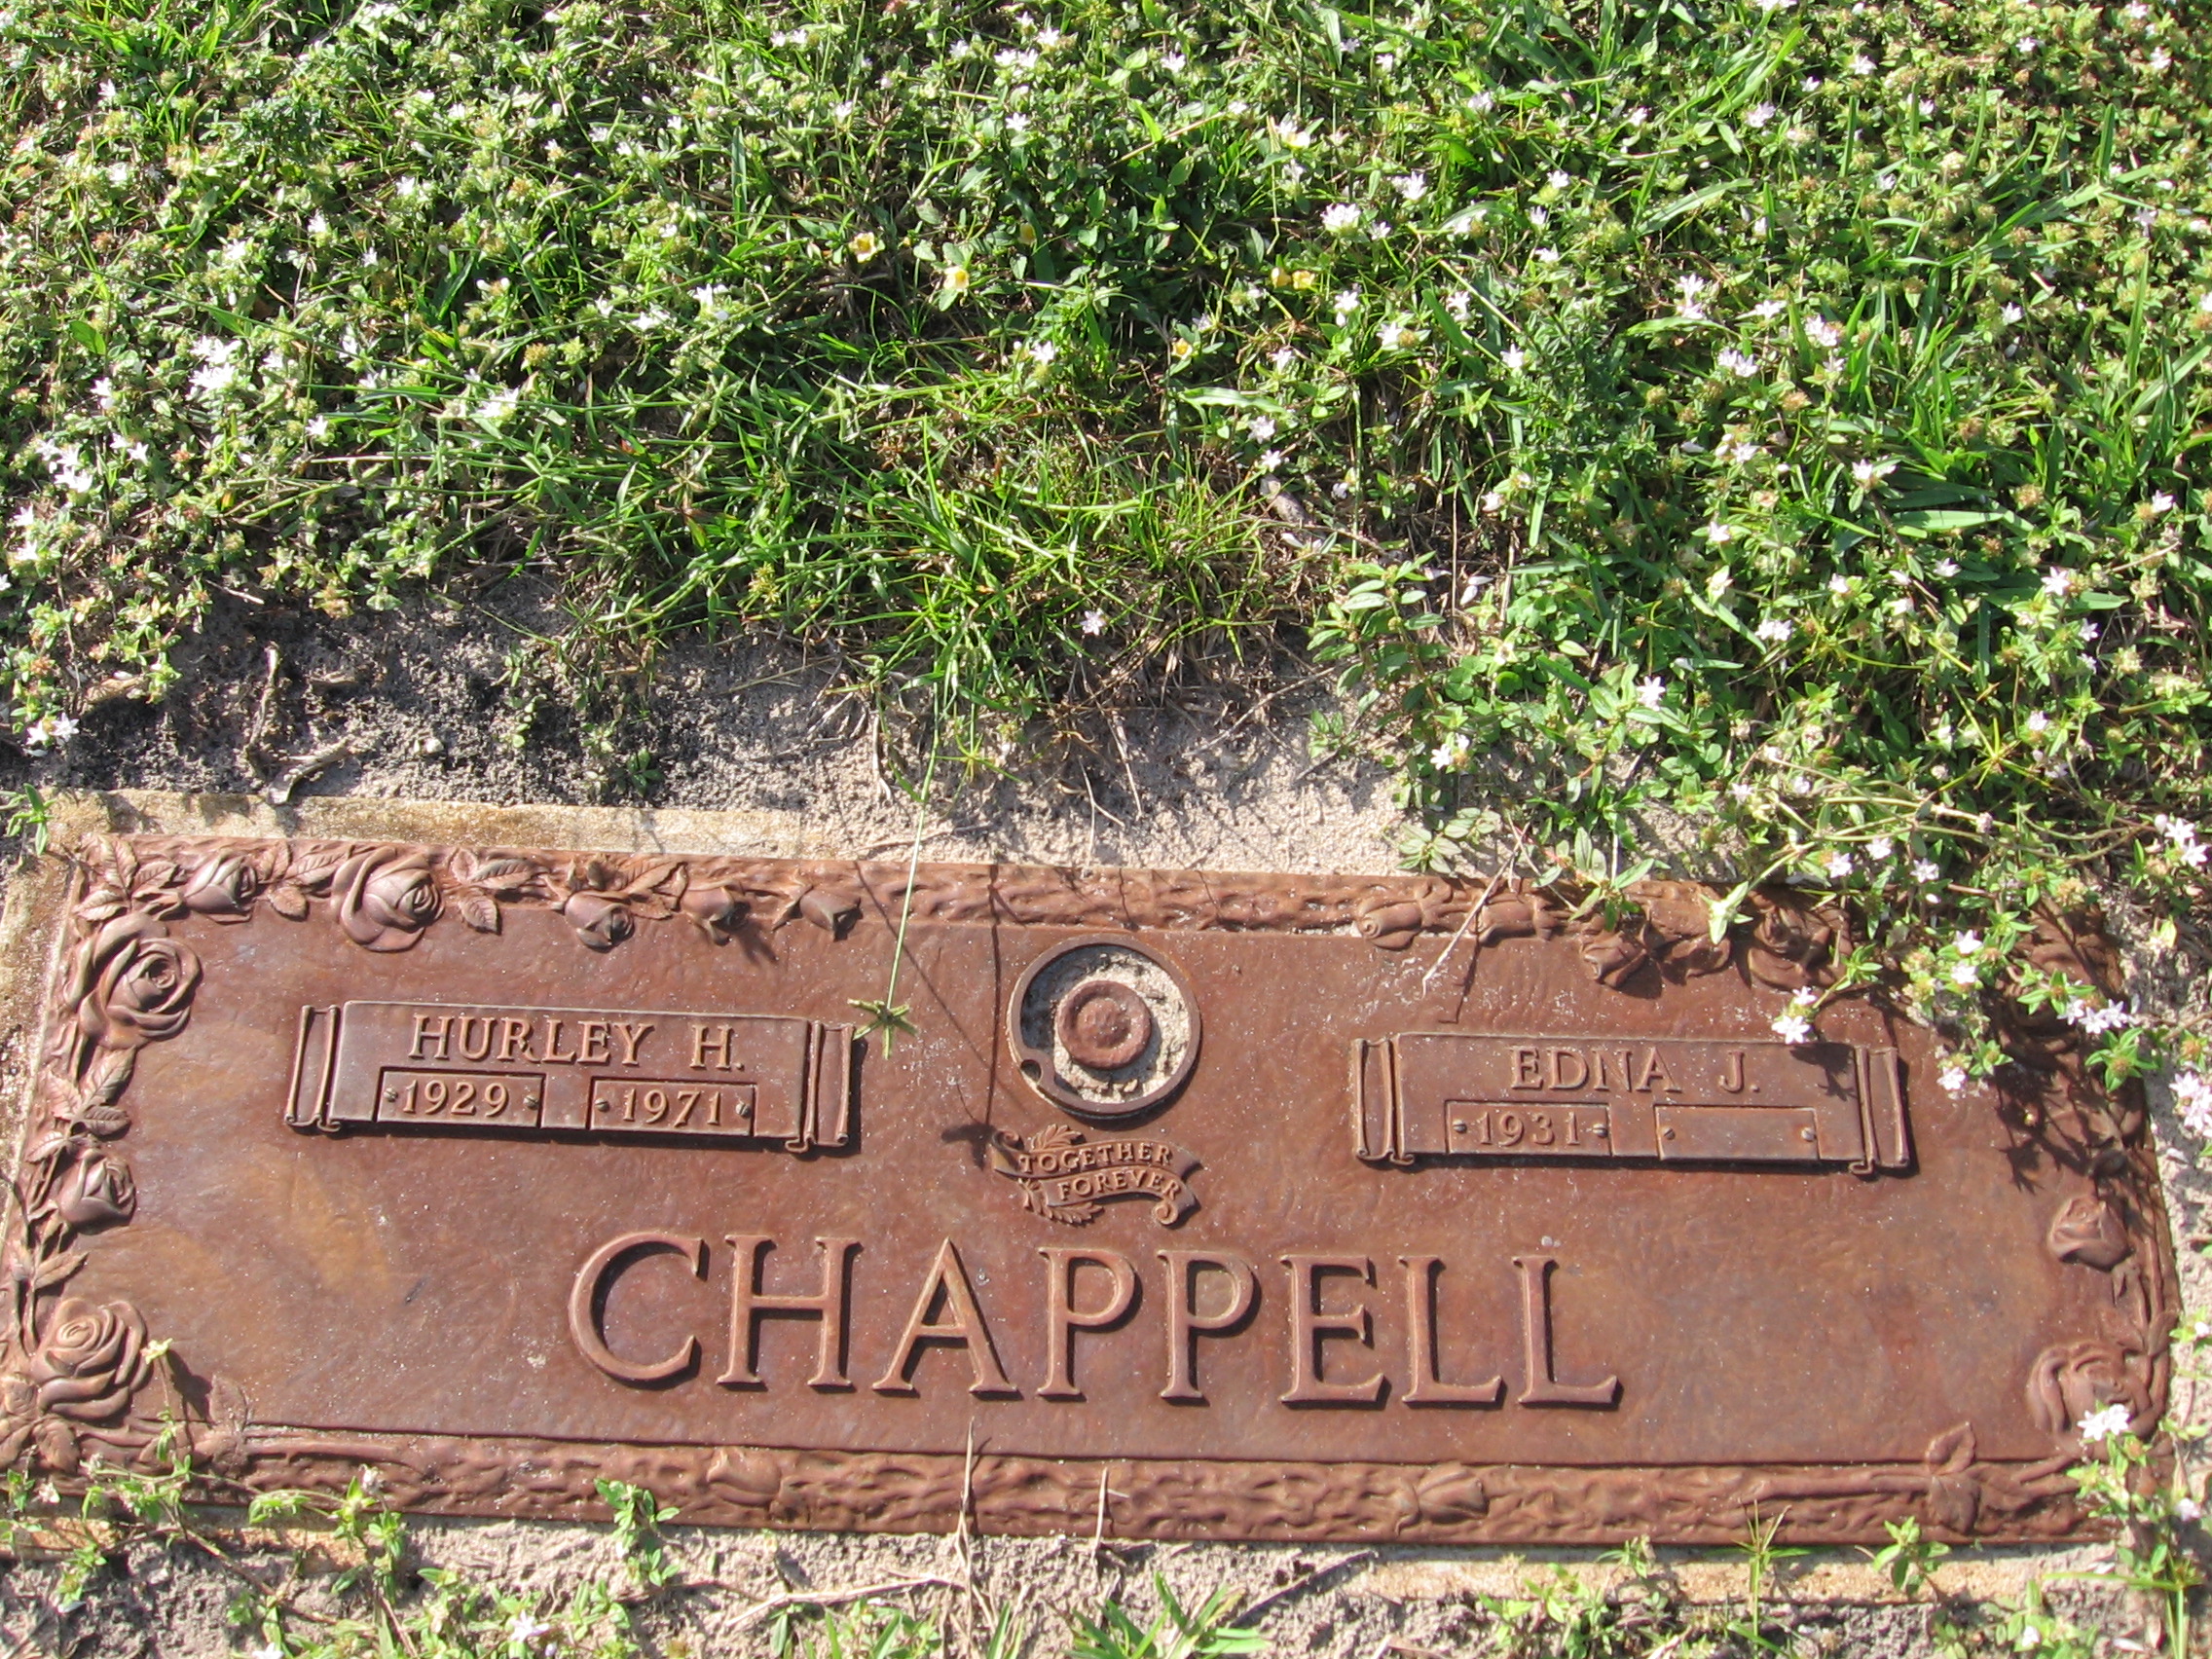 Hurley H Chappell